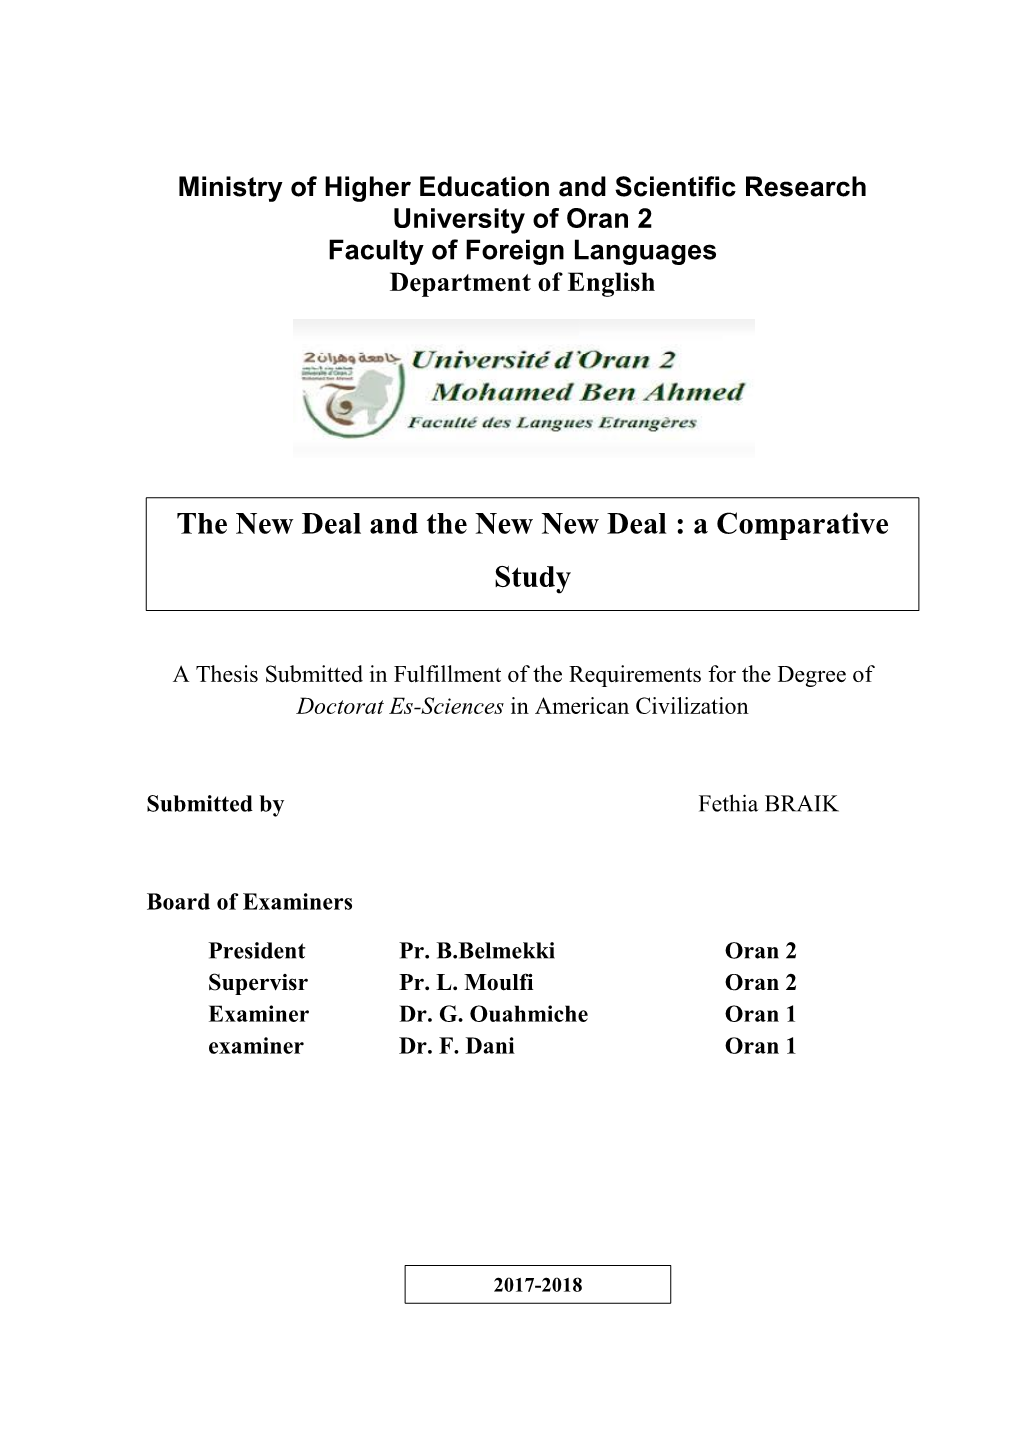 The New Deal and the New New Deal : a Comparative Study